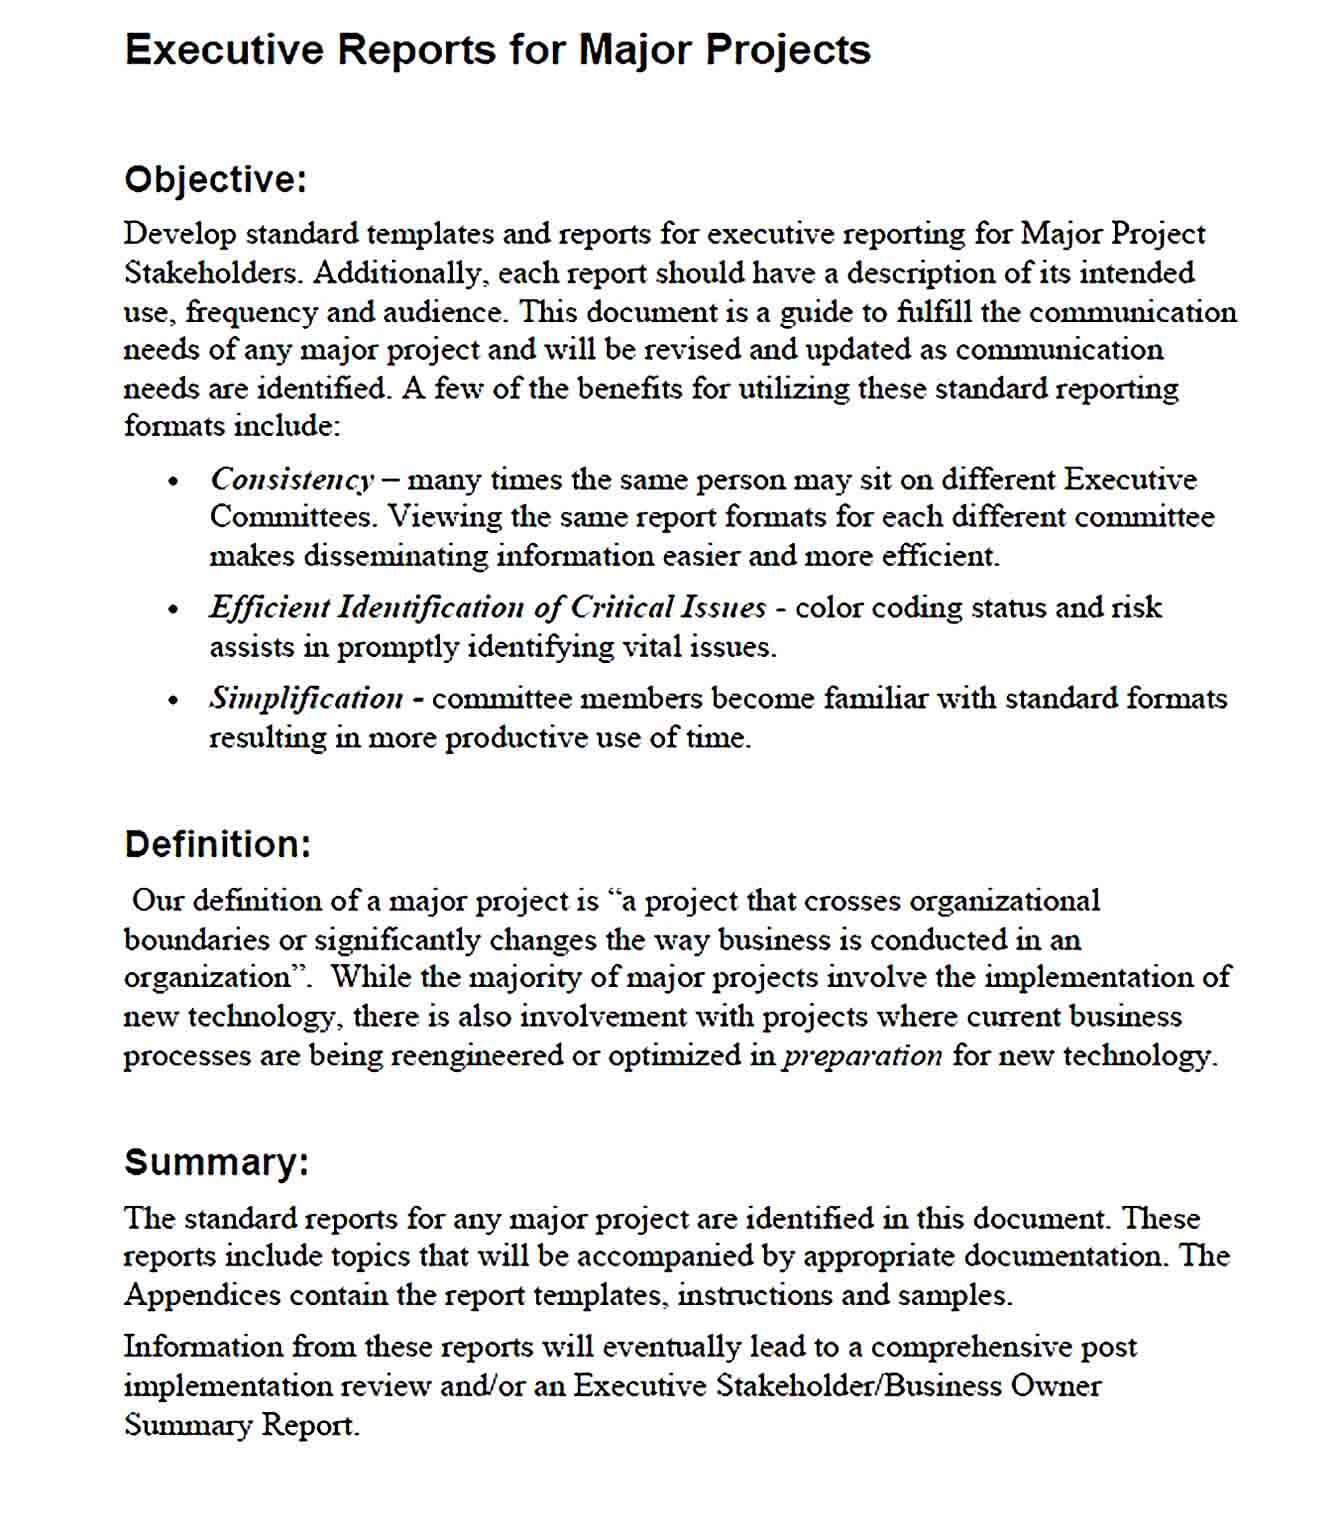 Sample example of executive report